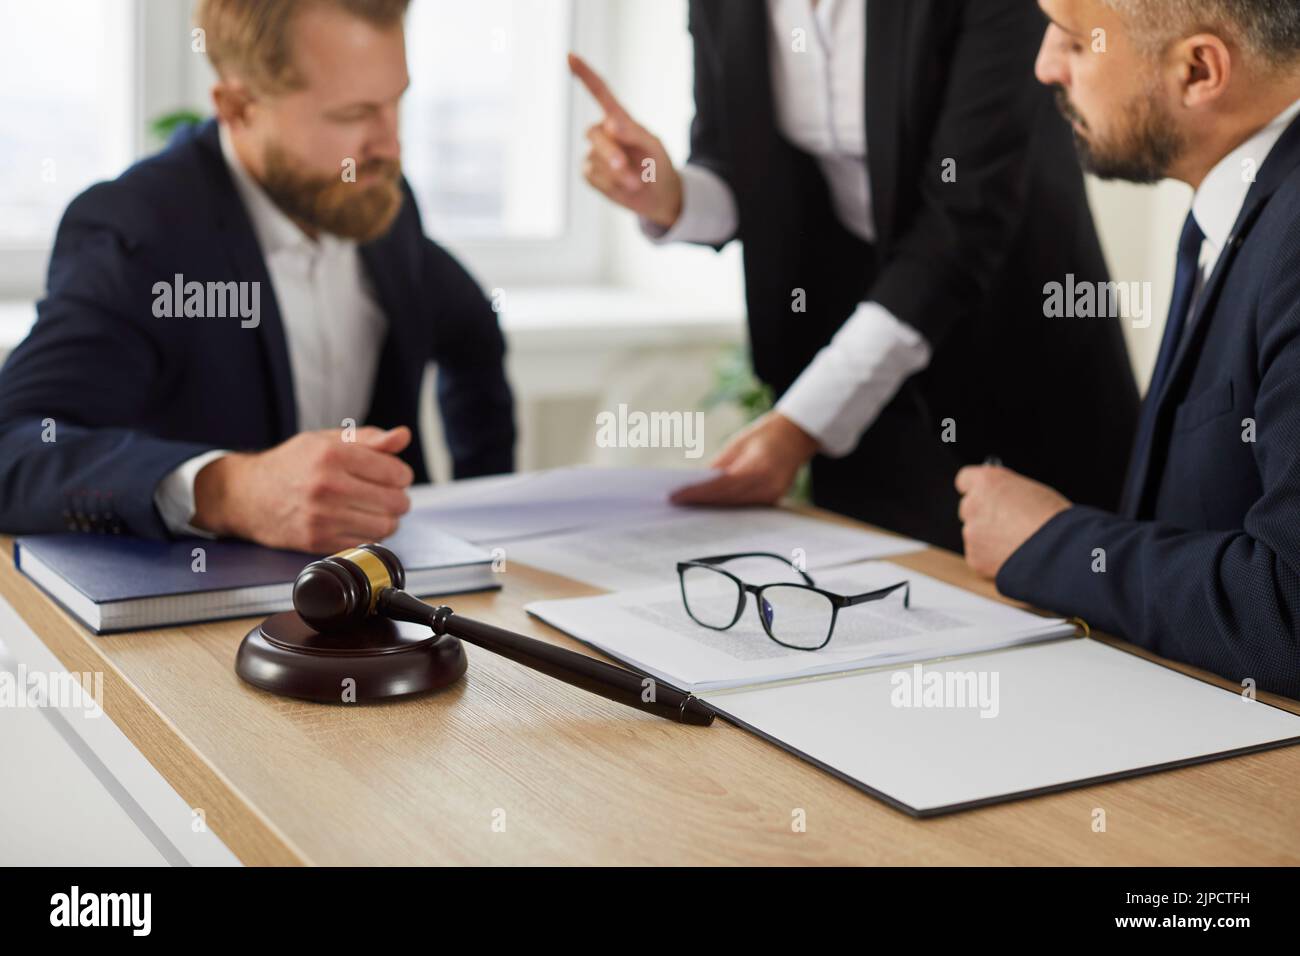 Meeting in office of team of lawyers and their client to discuss legal case or consult notary. Stock Photo